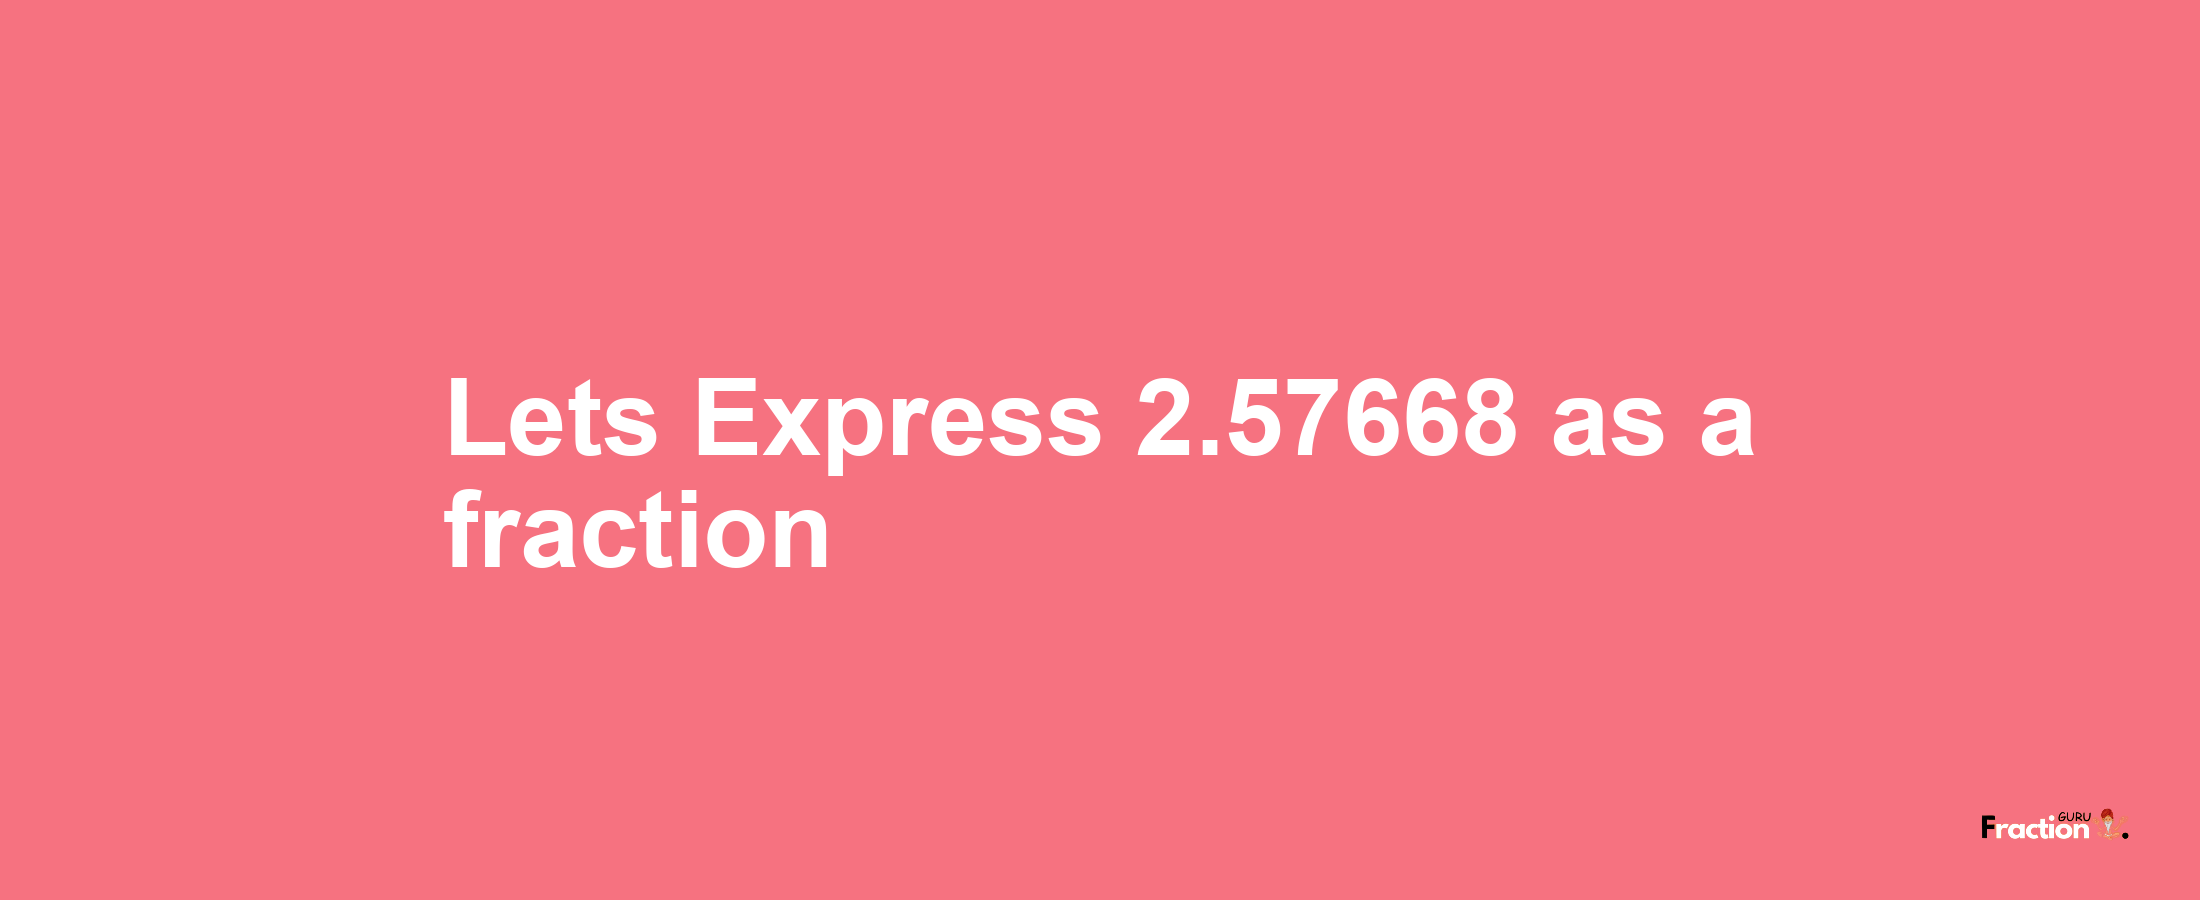 Lets Express 2.57668 as afraction